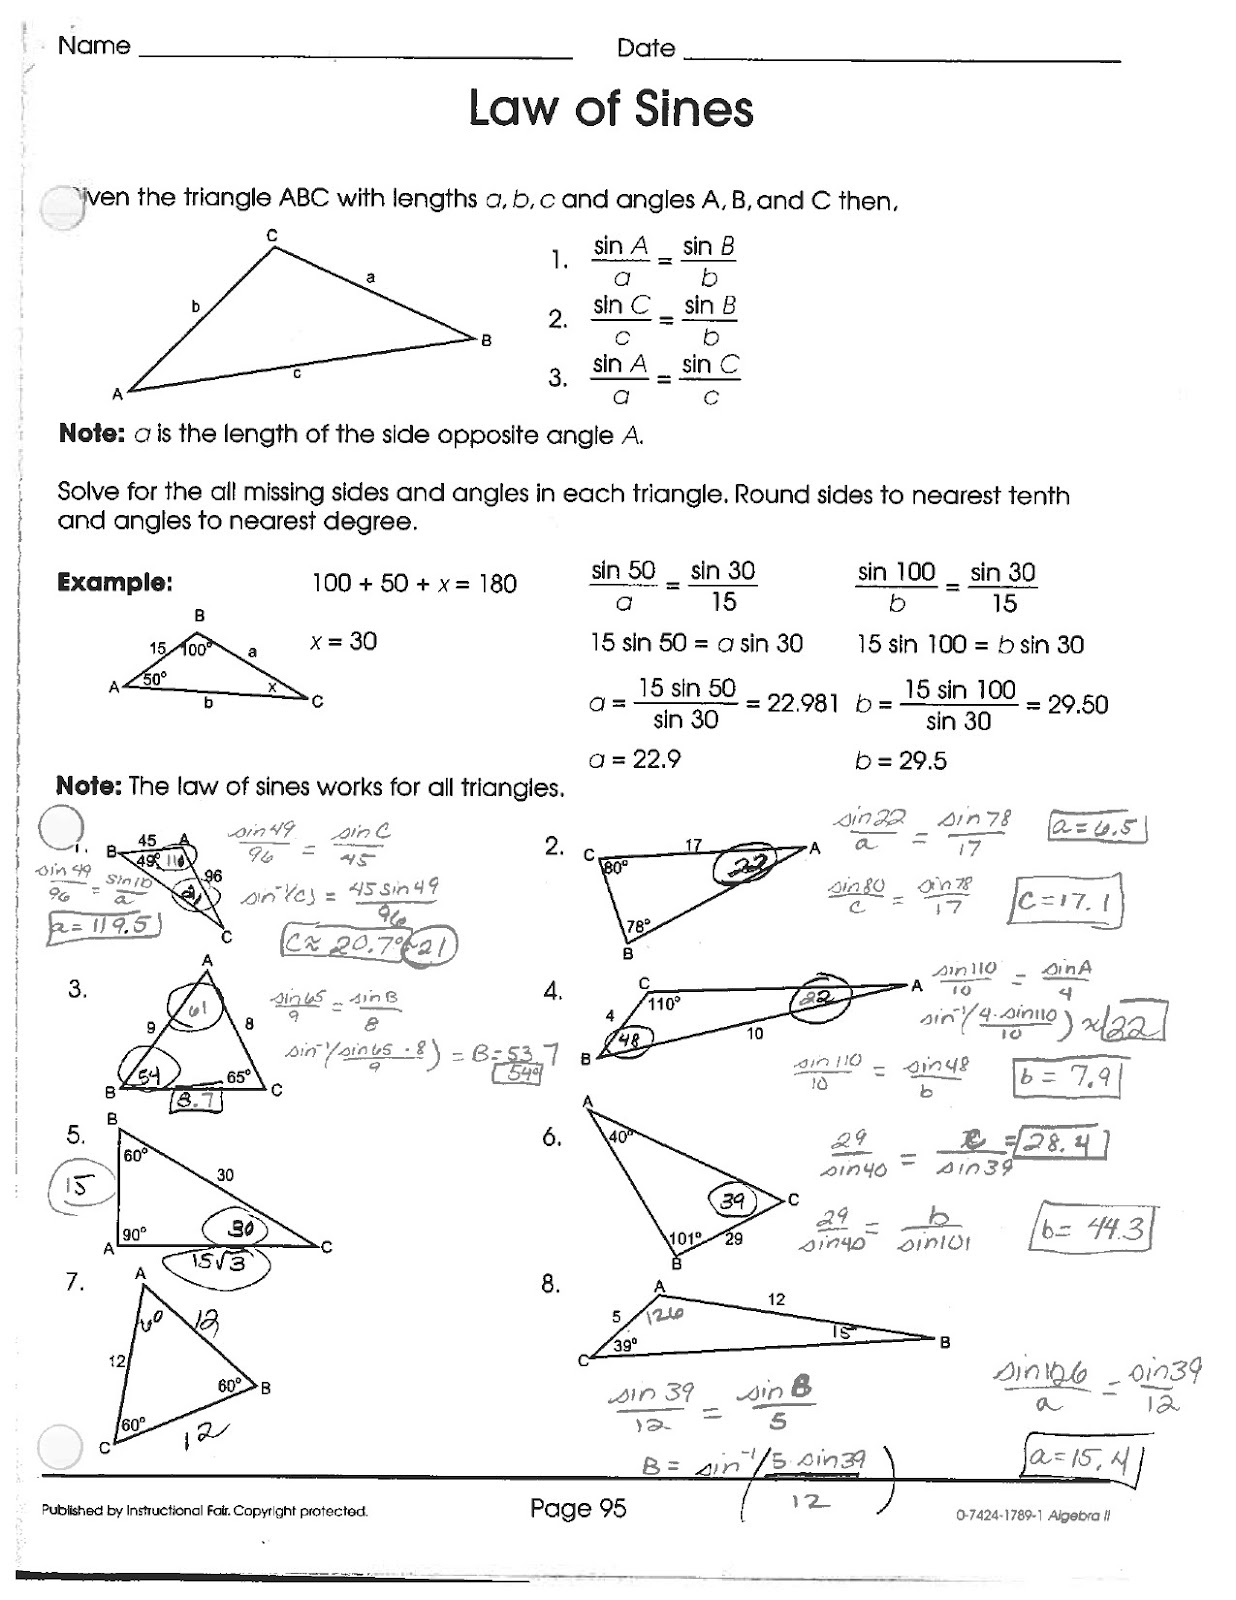 math-classes-spring-2012-pre-calc-laws-of-sines-and-cosines-worksheet